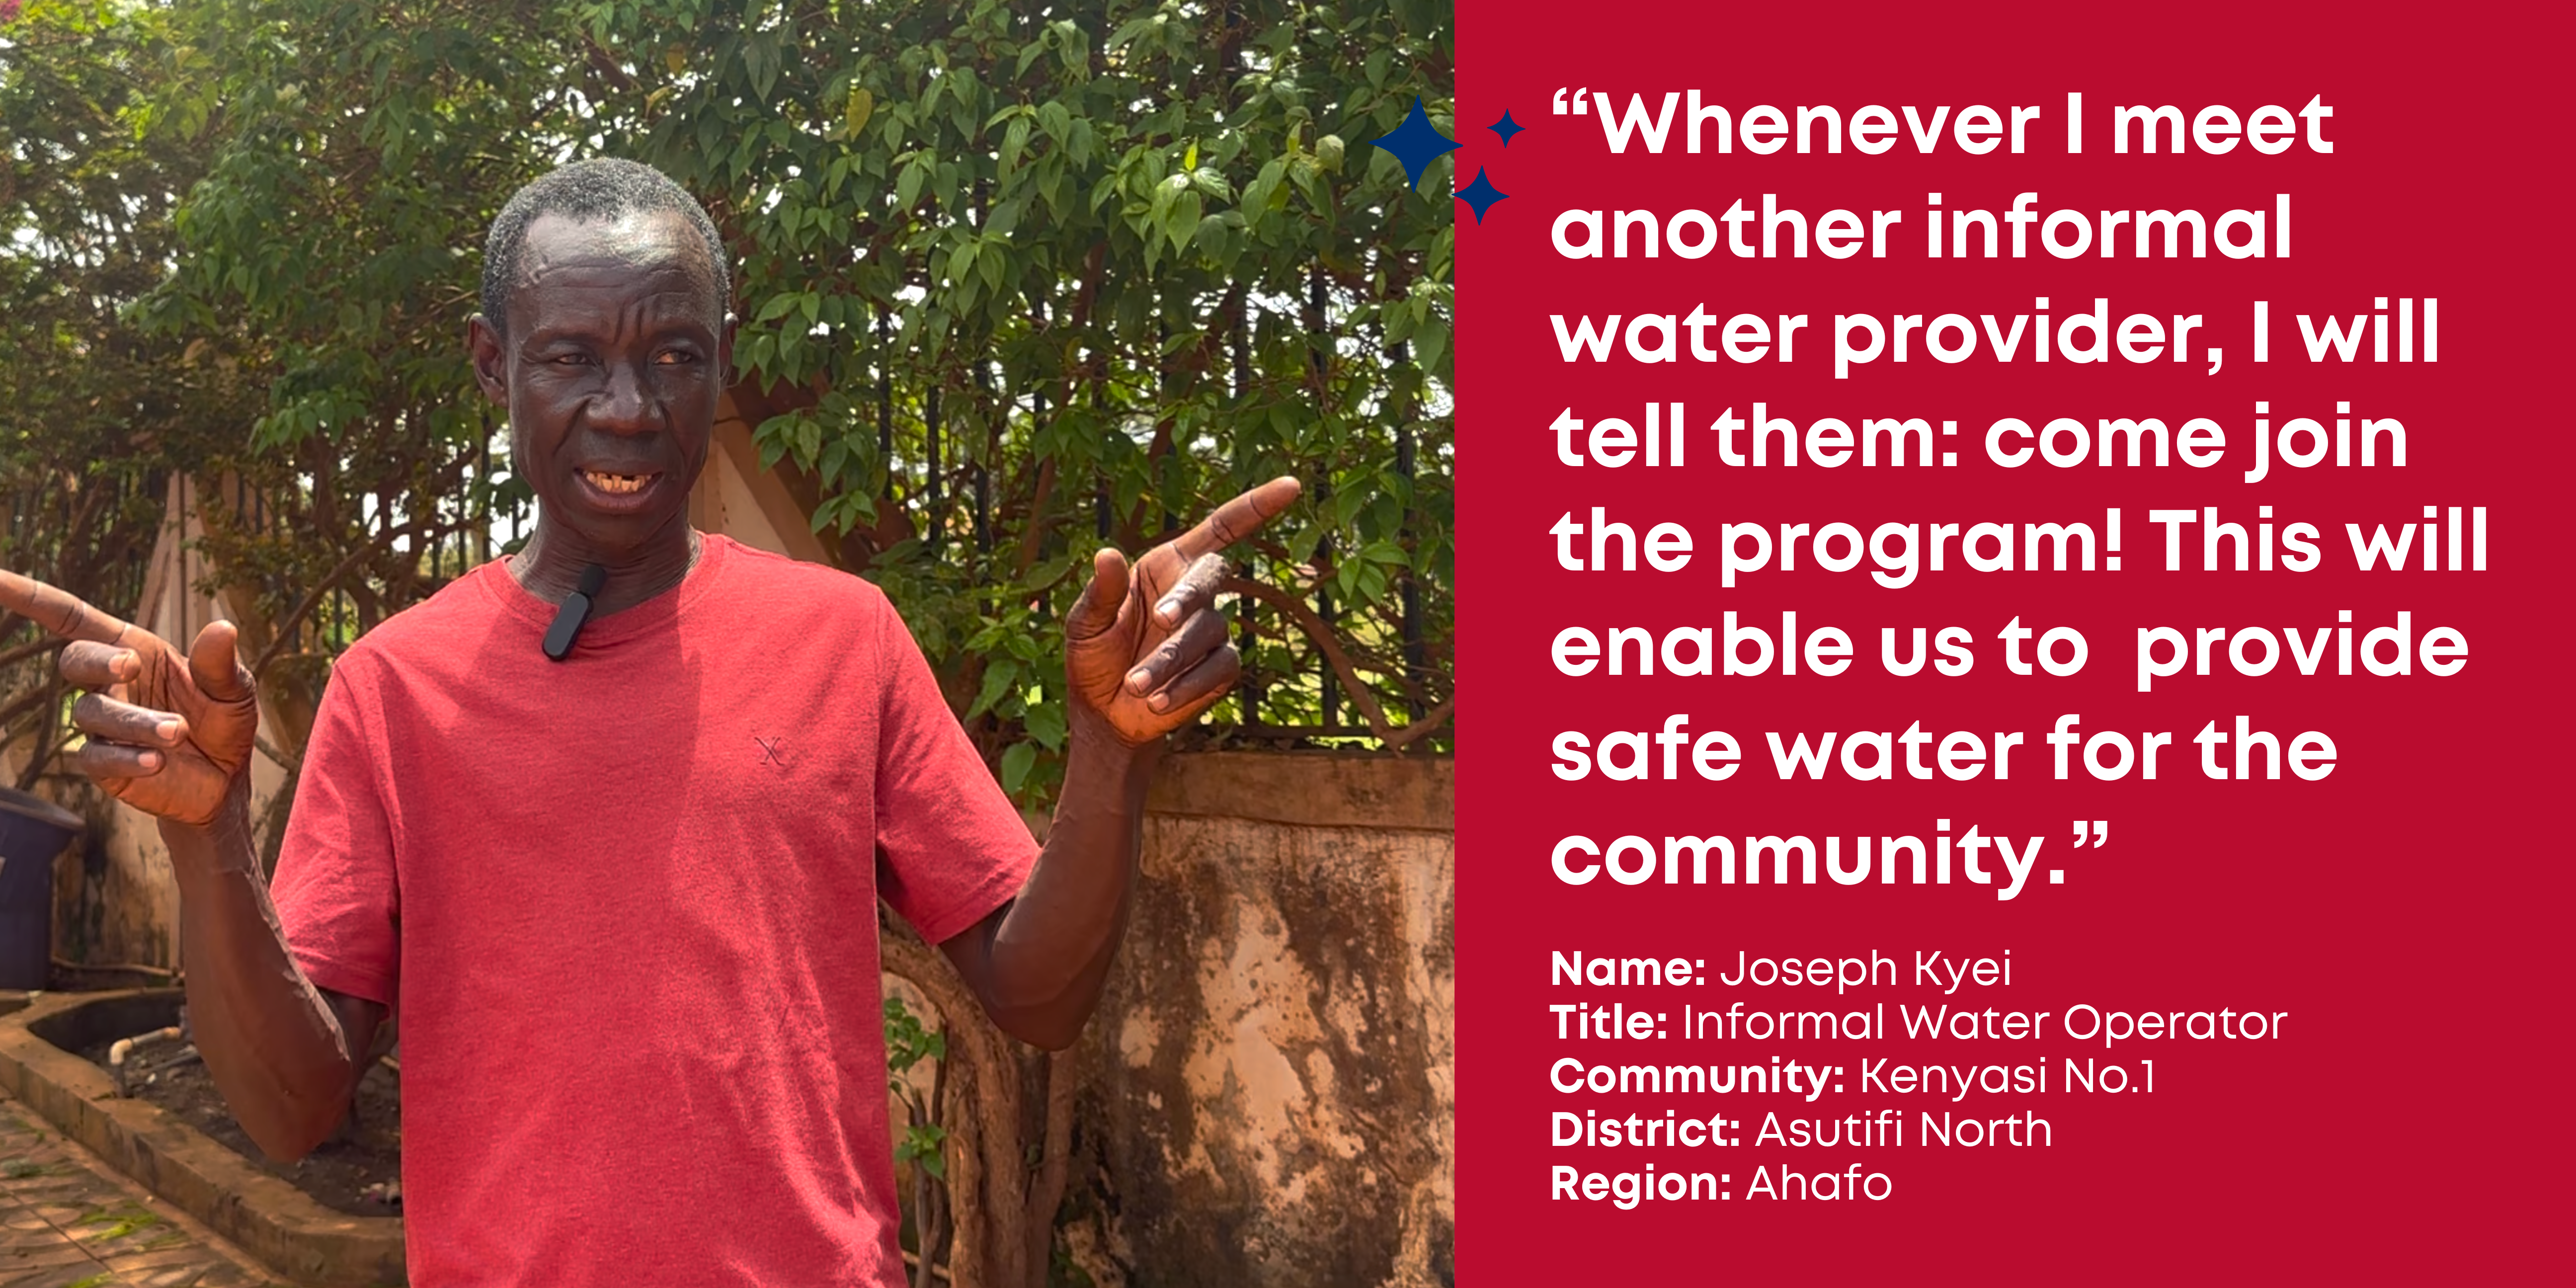 Informal water operator, Joseph Kyei, wears a red t-shirt, gestures with his hands while speaking, pointing in opposite directions and says: "Whenever I meet another informal water provider, I will tell them: come join the program! This will enable us to provide safe water for the community." Asutifi North, Ahafo, Ghana